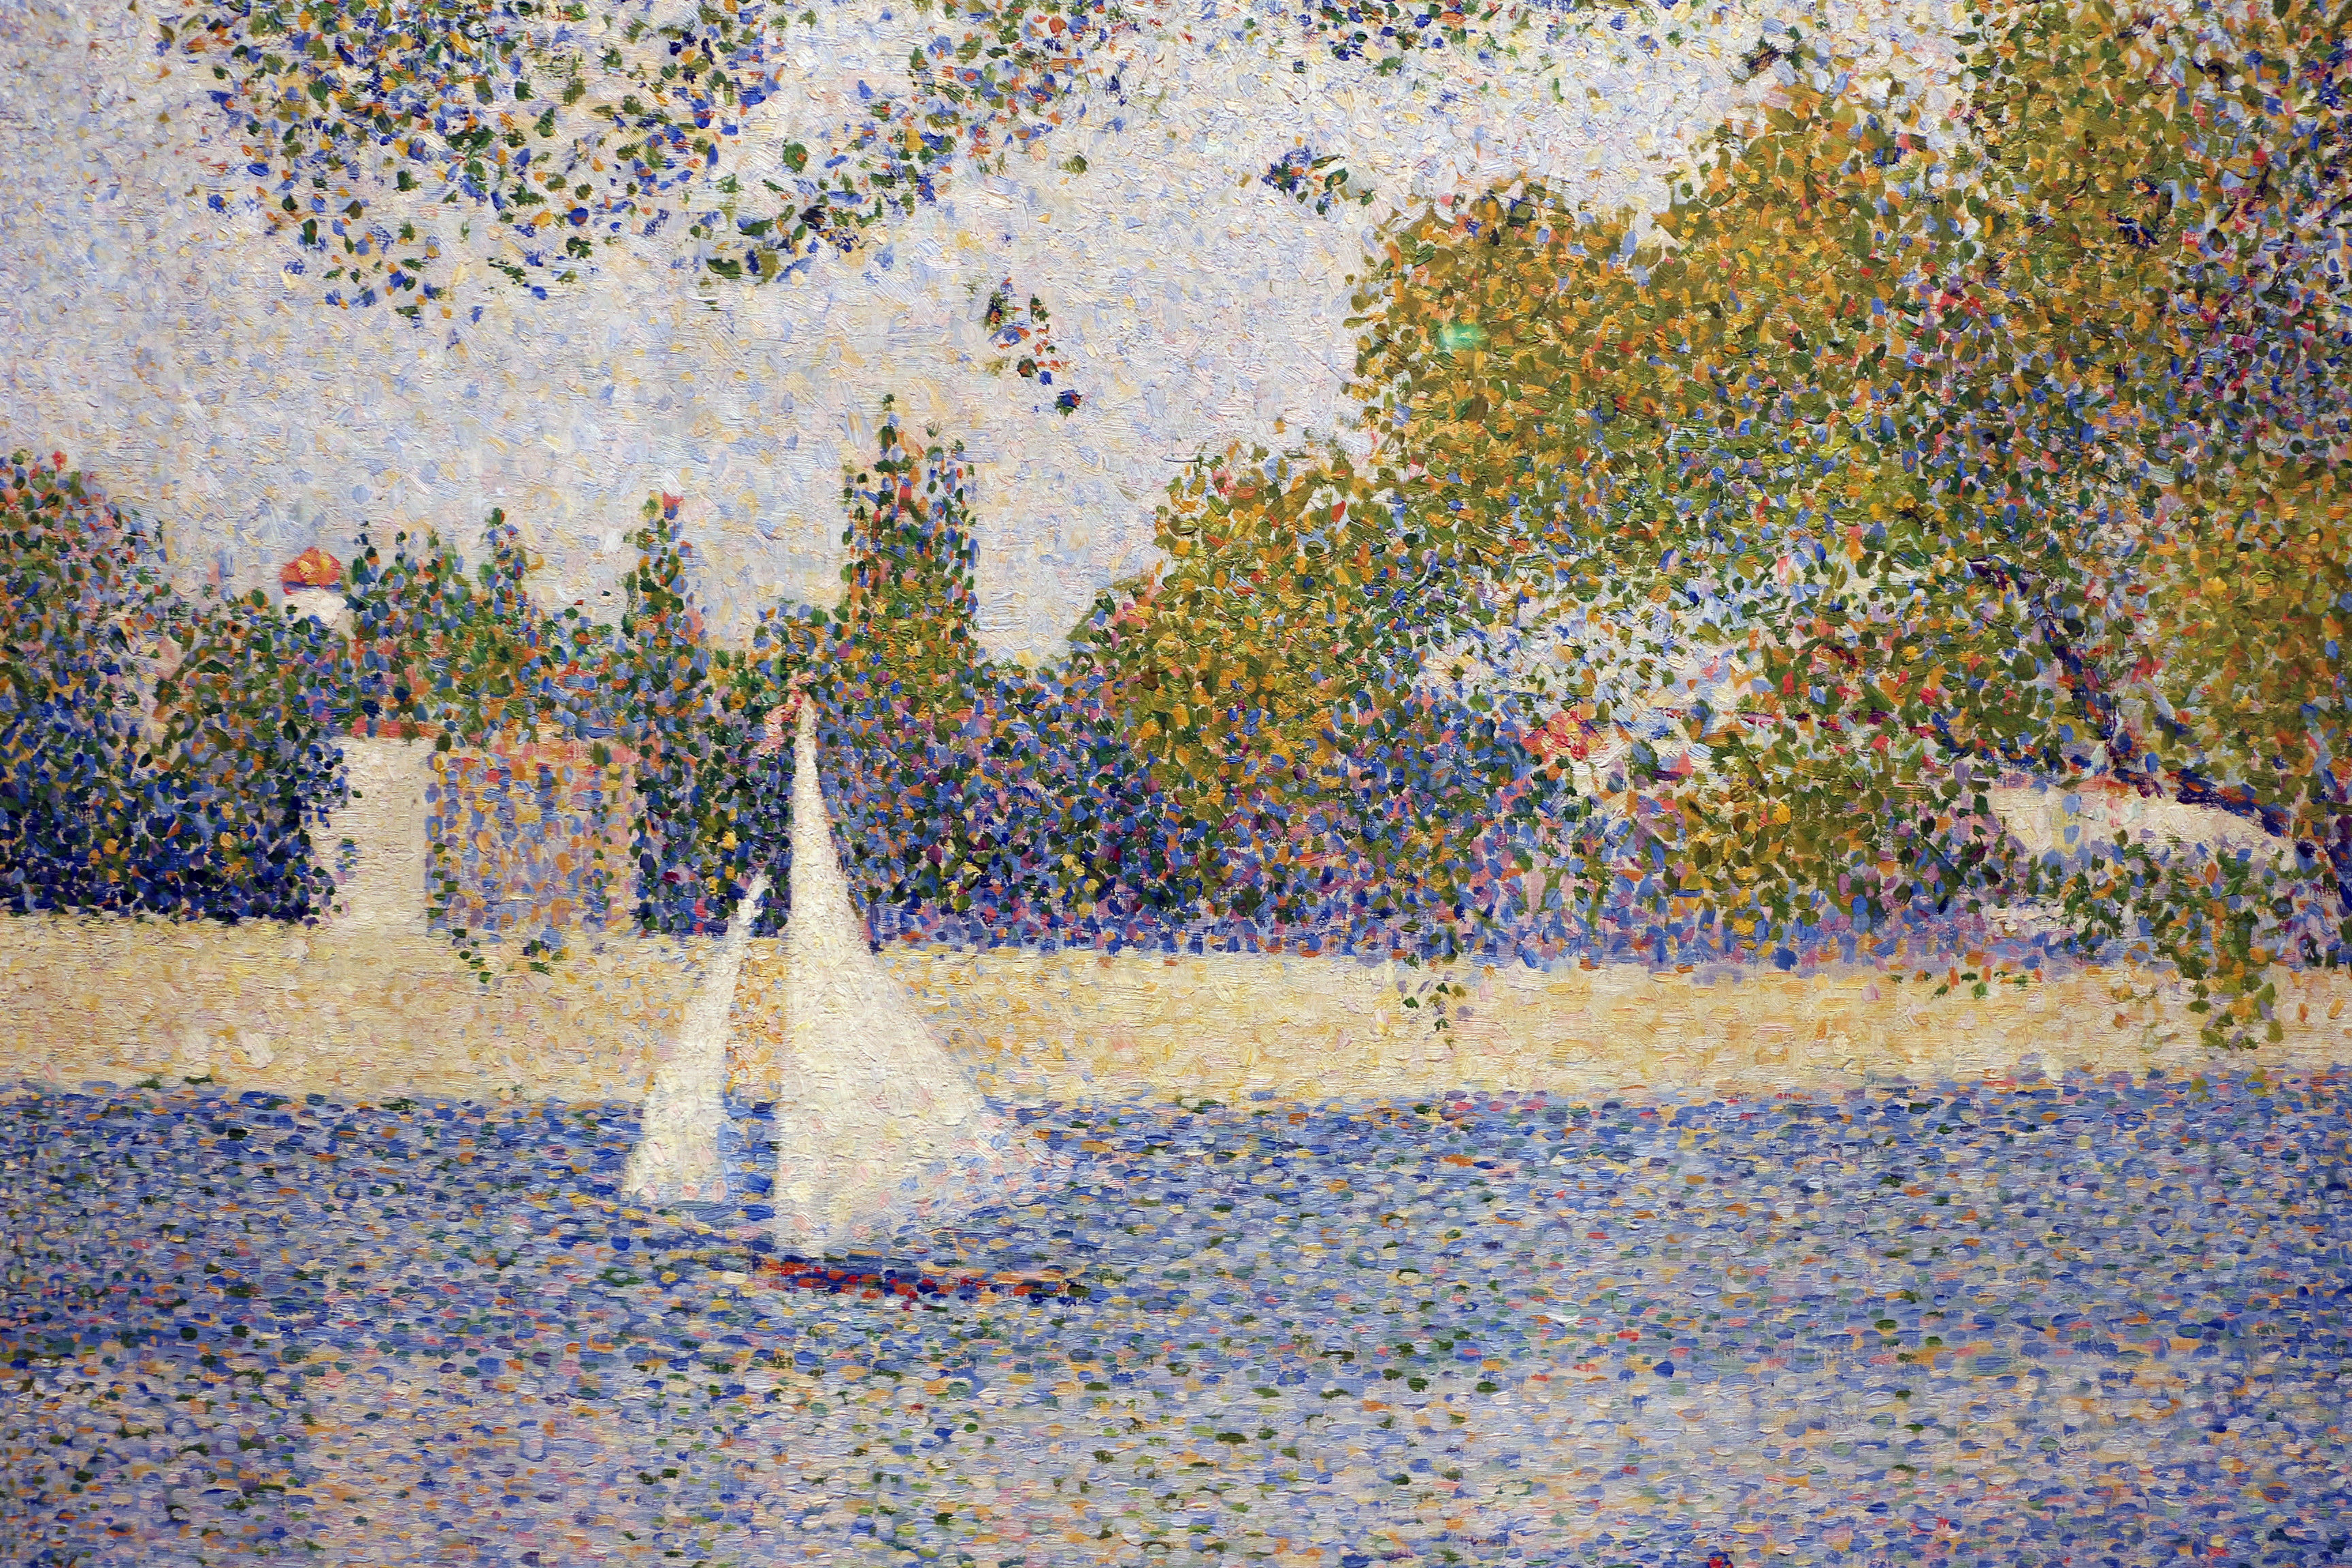 Abstract painting by Georges Seurat (1859-1891) The Seine at the Grand Jatte Spring 1888 